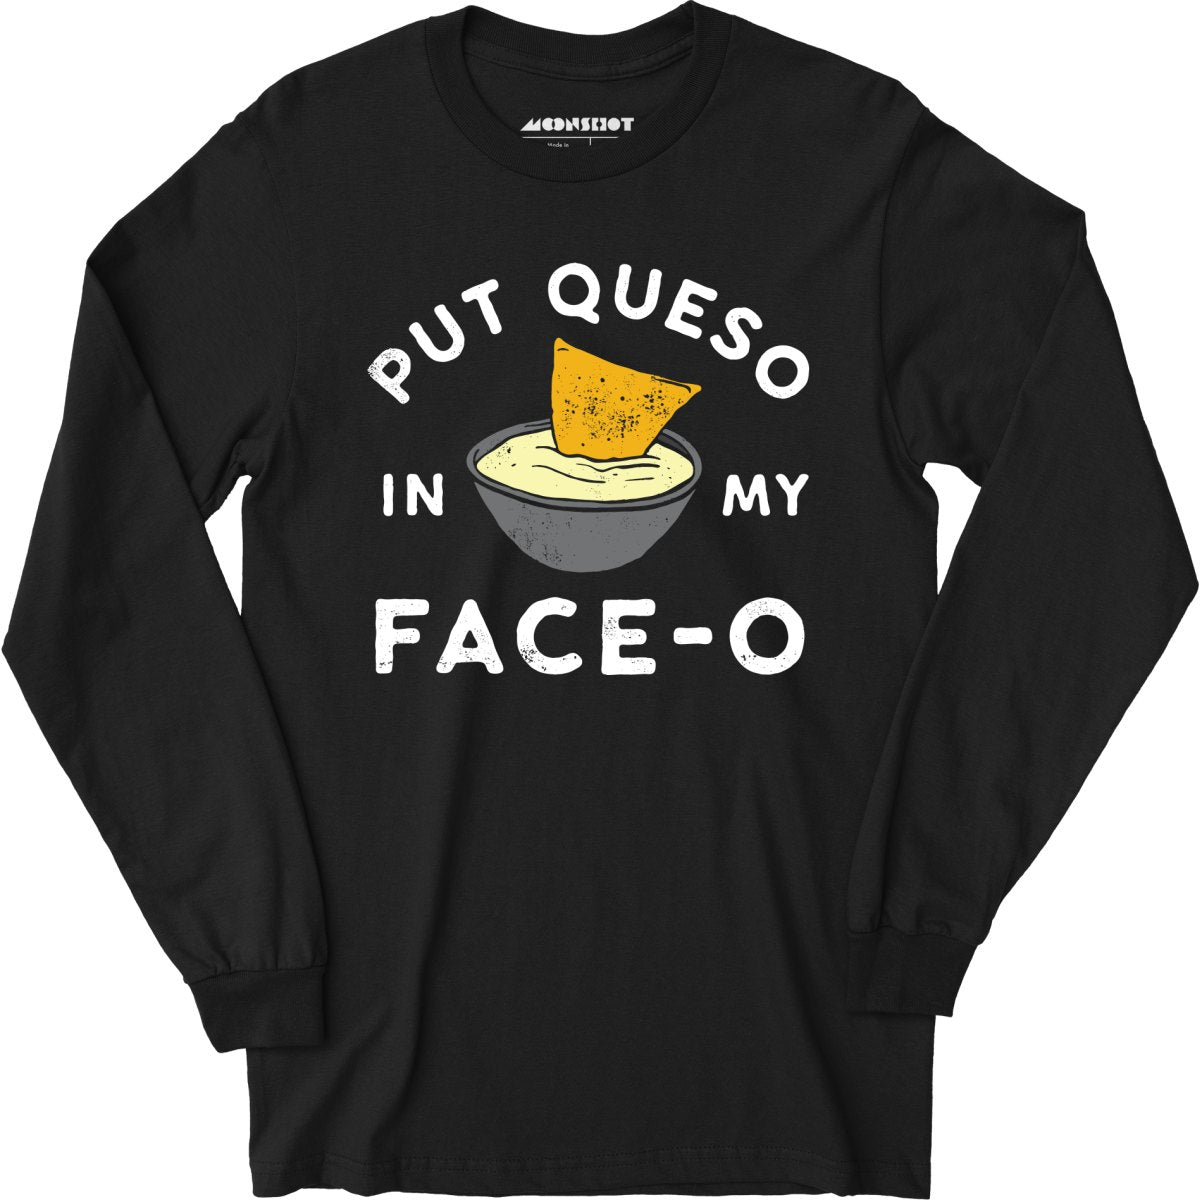 Put Queso in My Face-O - Long Sleeve T-Shirt